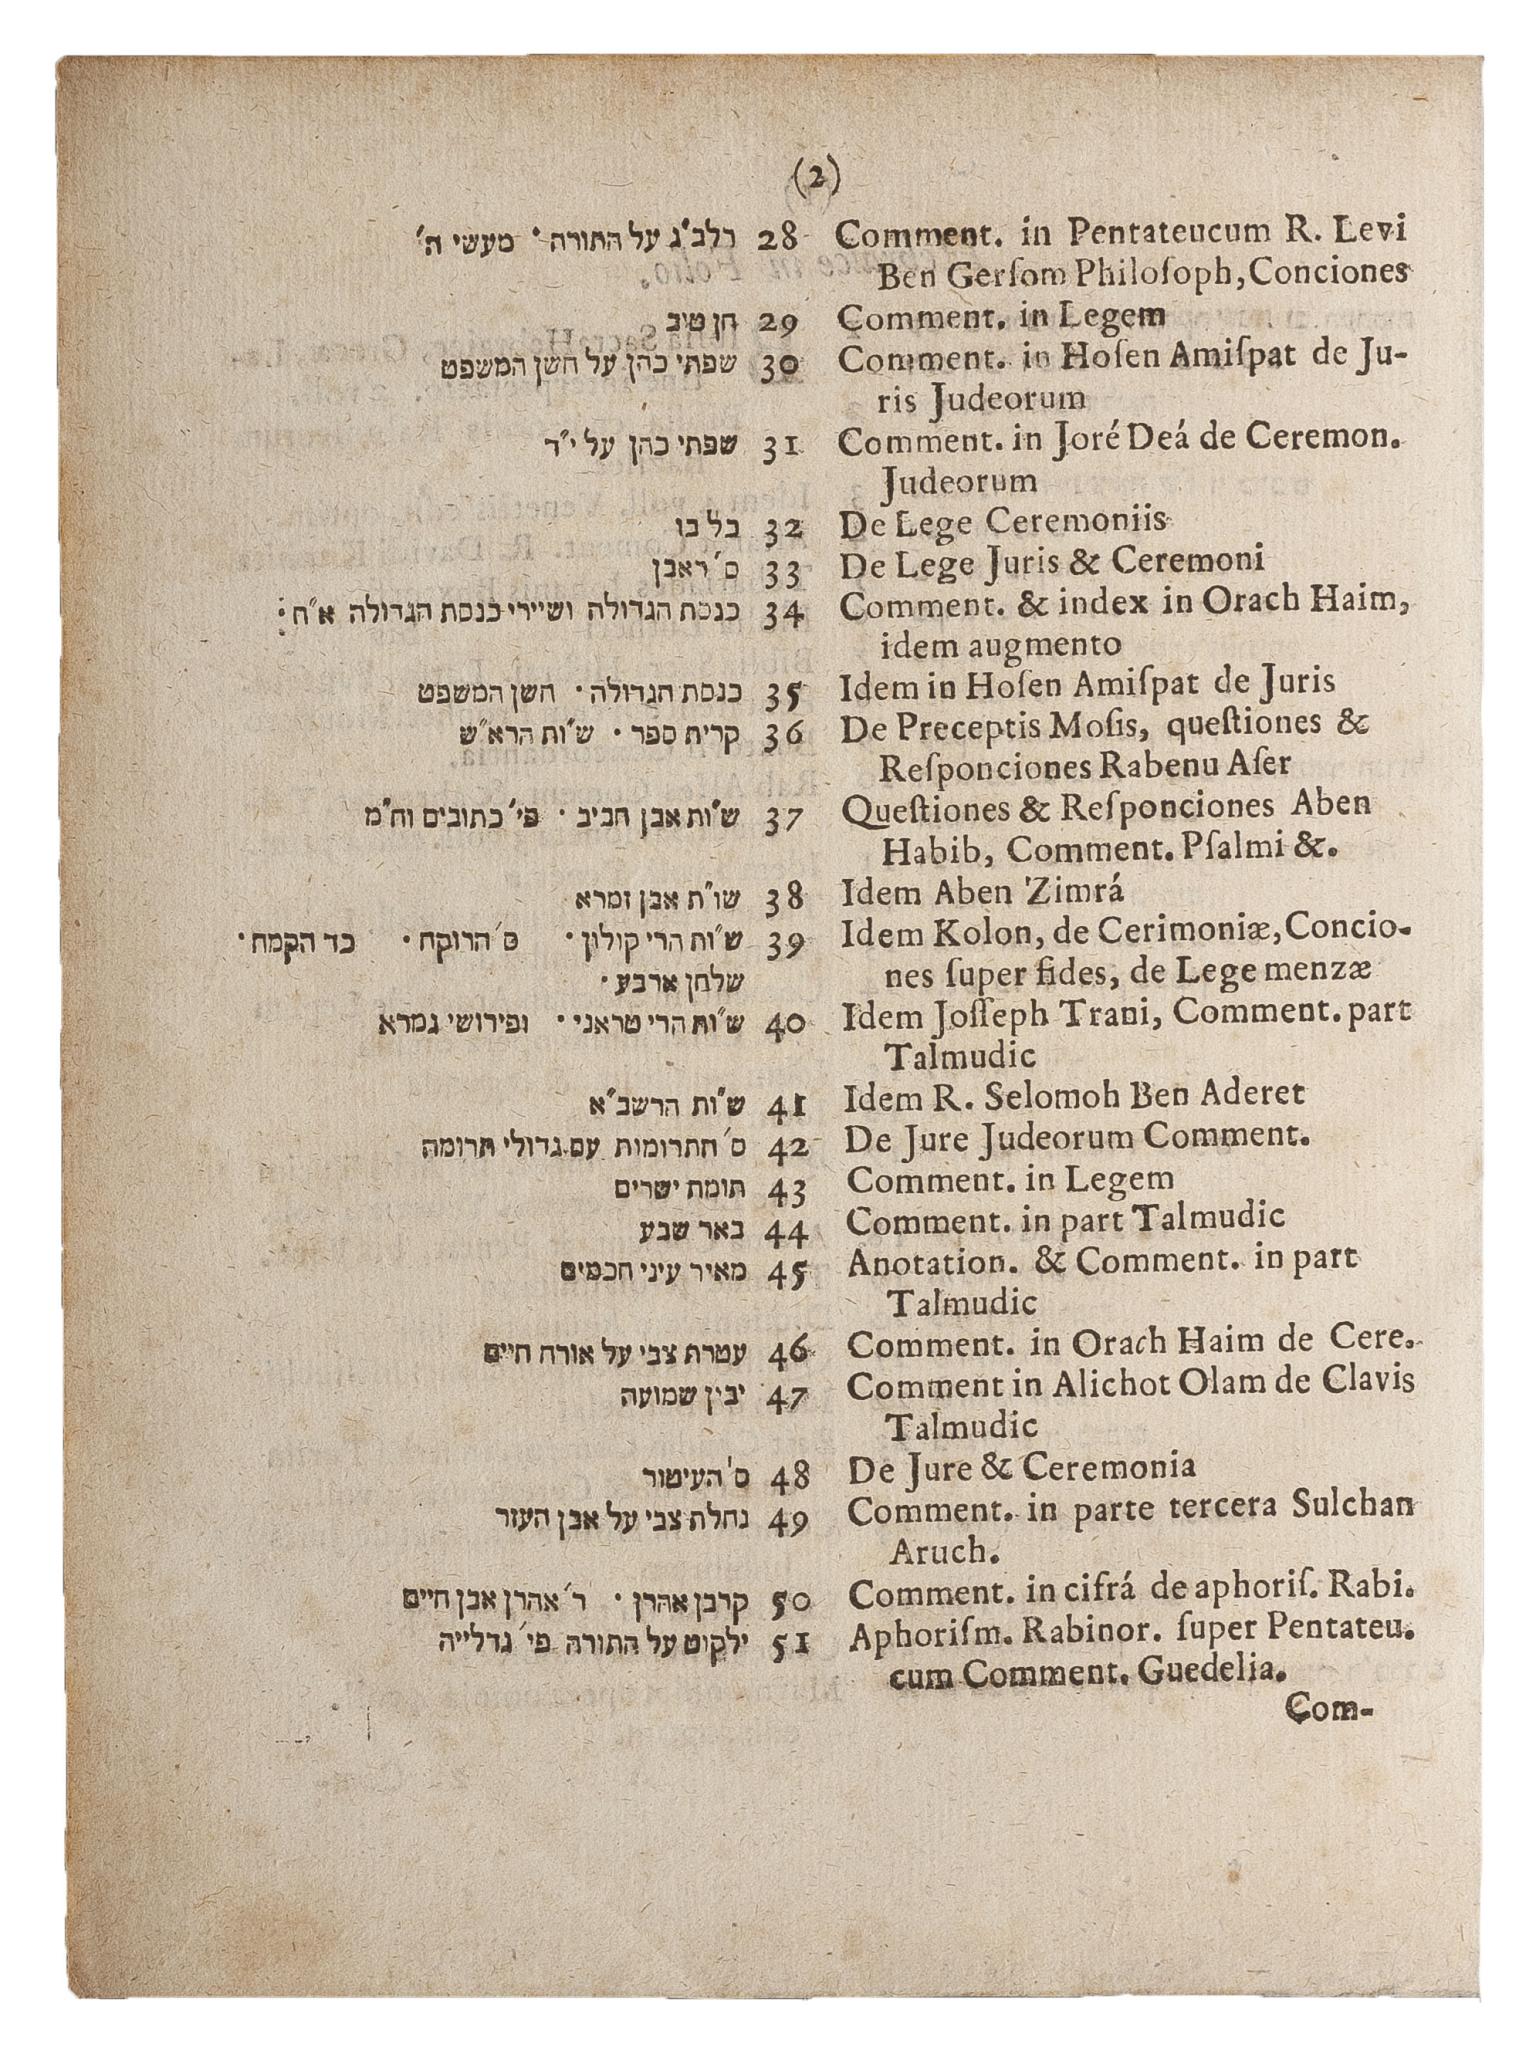 Printed page of side-by-side, numbered Latin and Hebrew text. 